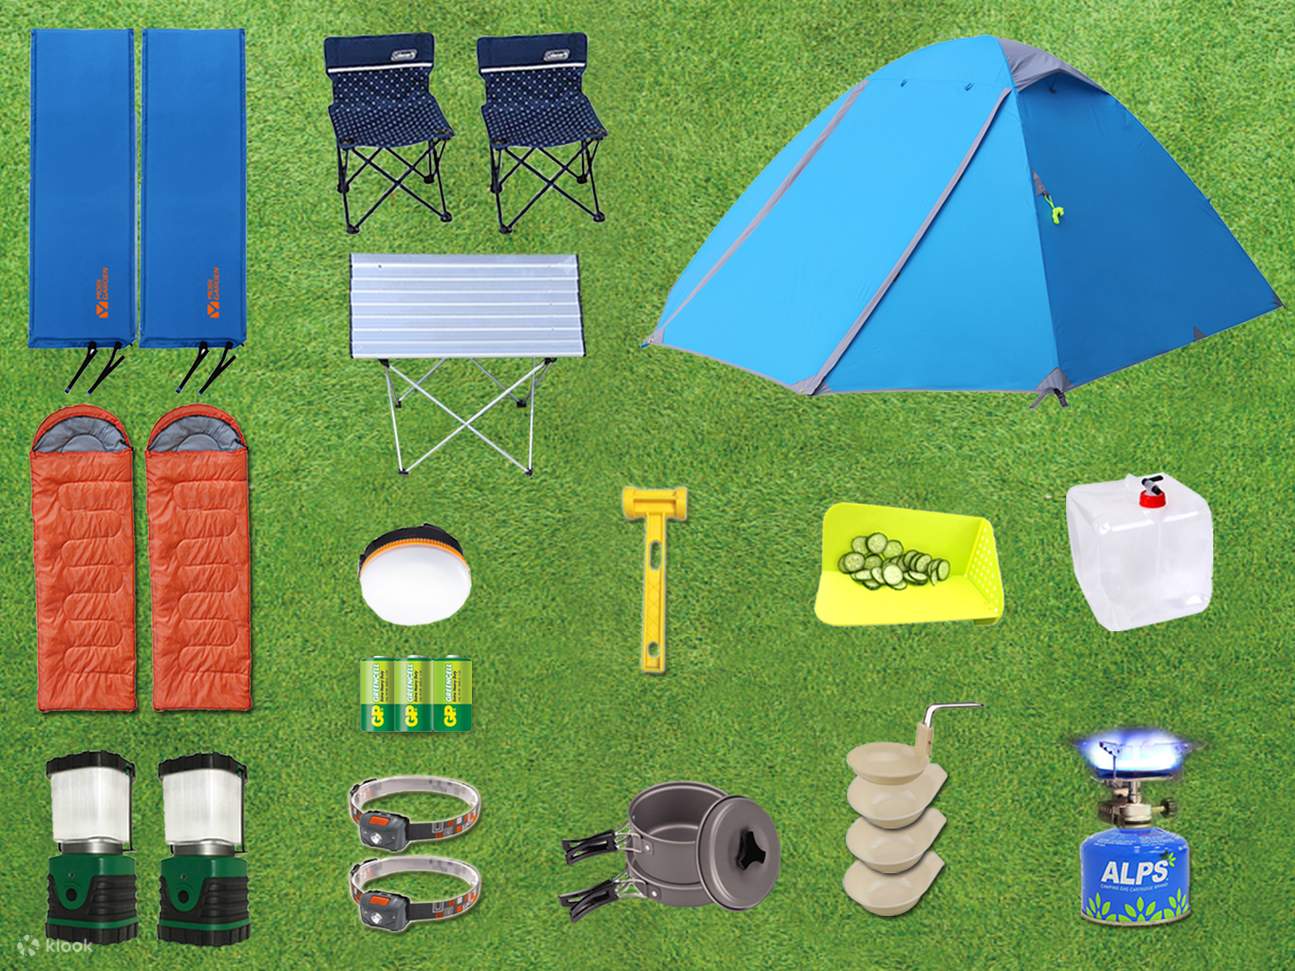 New To Camping? Rent A 'Camp Kit